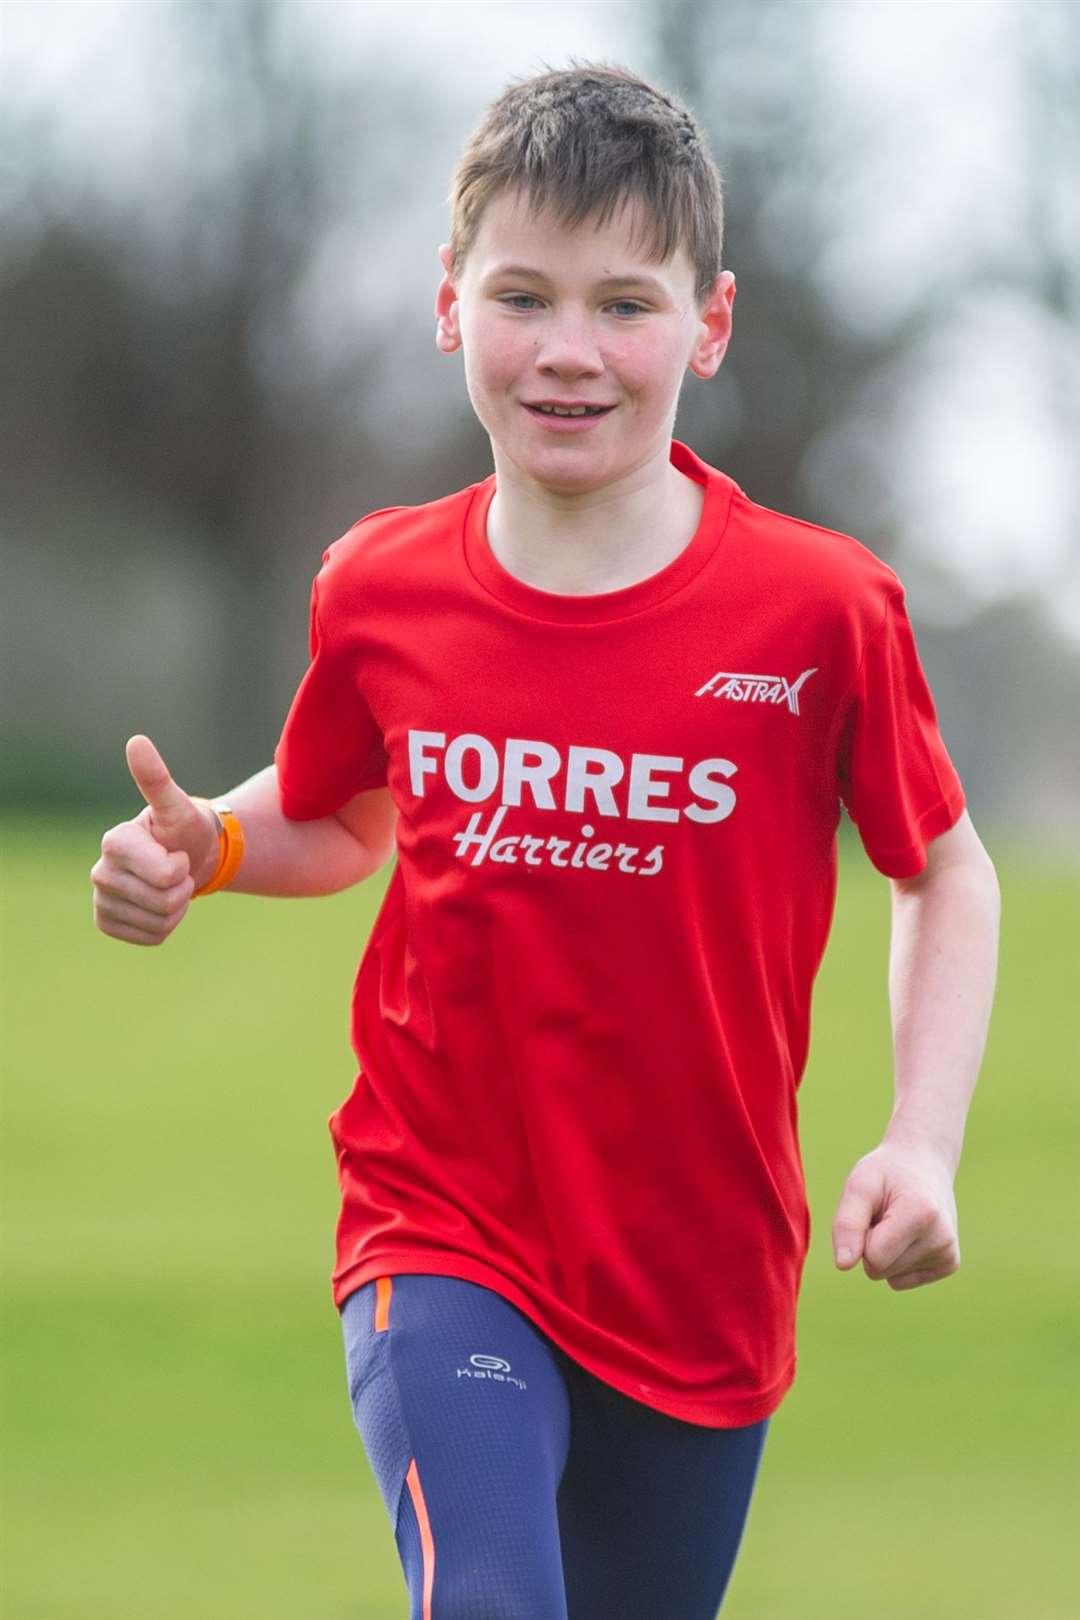 P6-7 Boys race winner - Angus Esson from Andersons Primary School...Forres Harriers' organised Forres Primary Schools Cross Country, held at Grant Park, Forres...Picture: Daniel Forsyth..